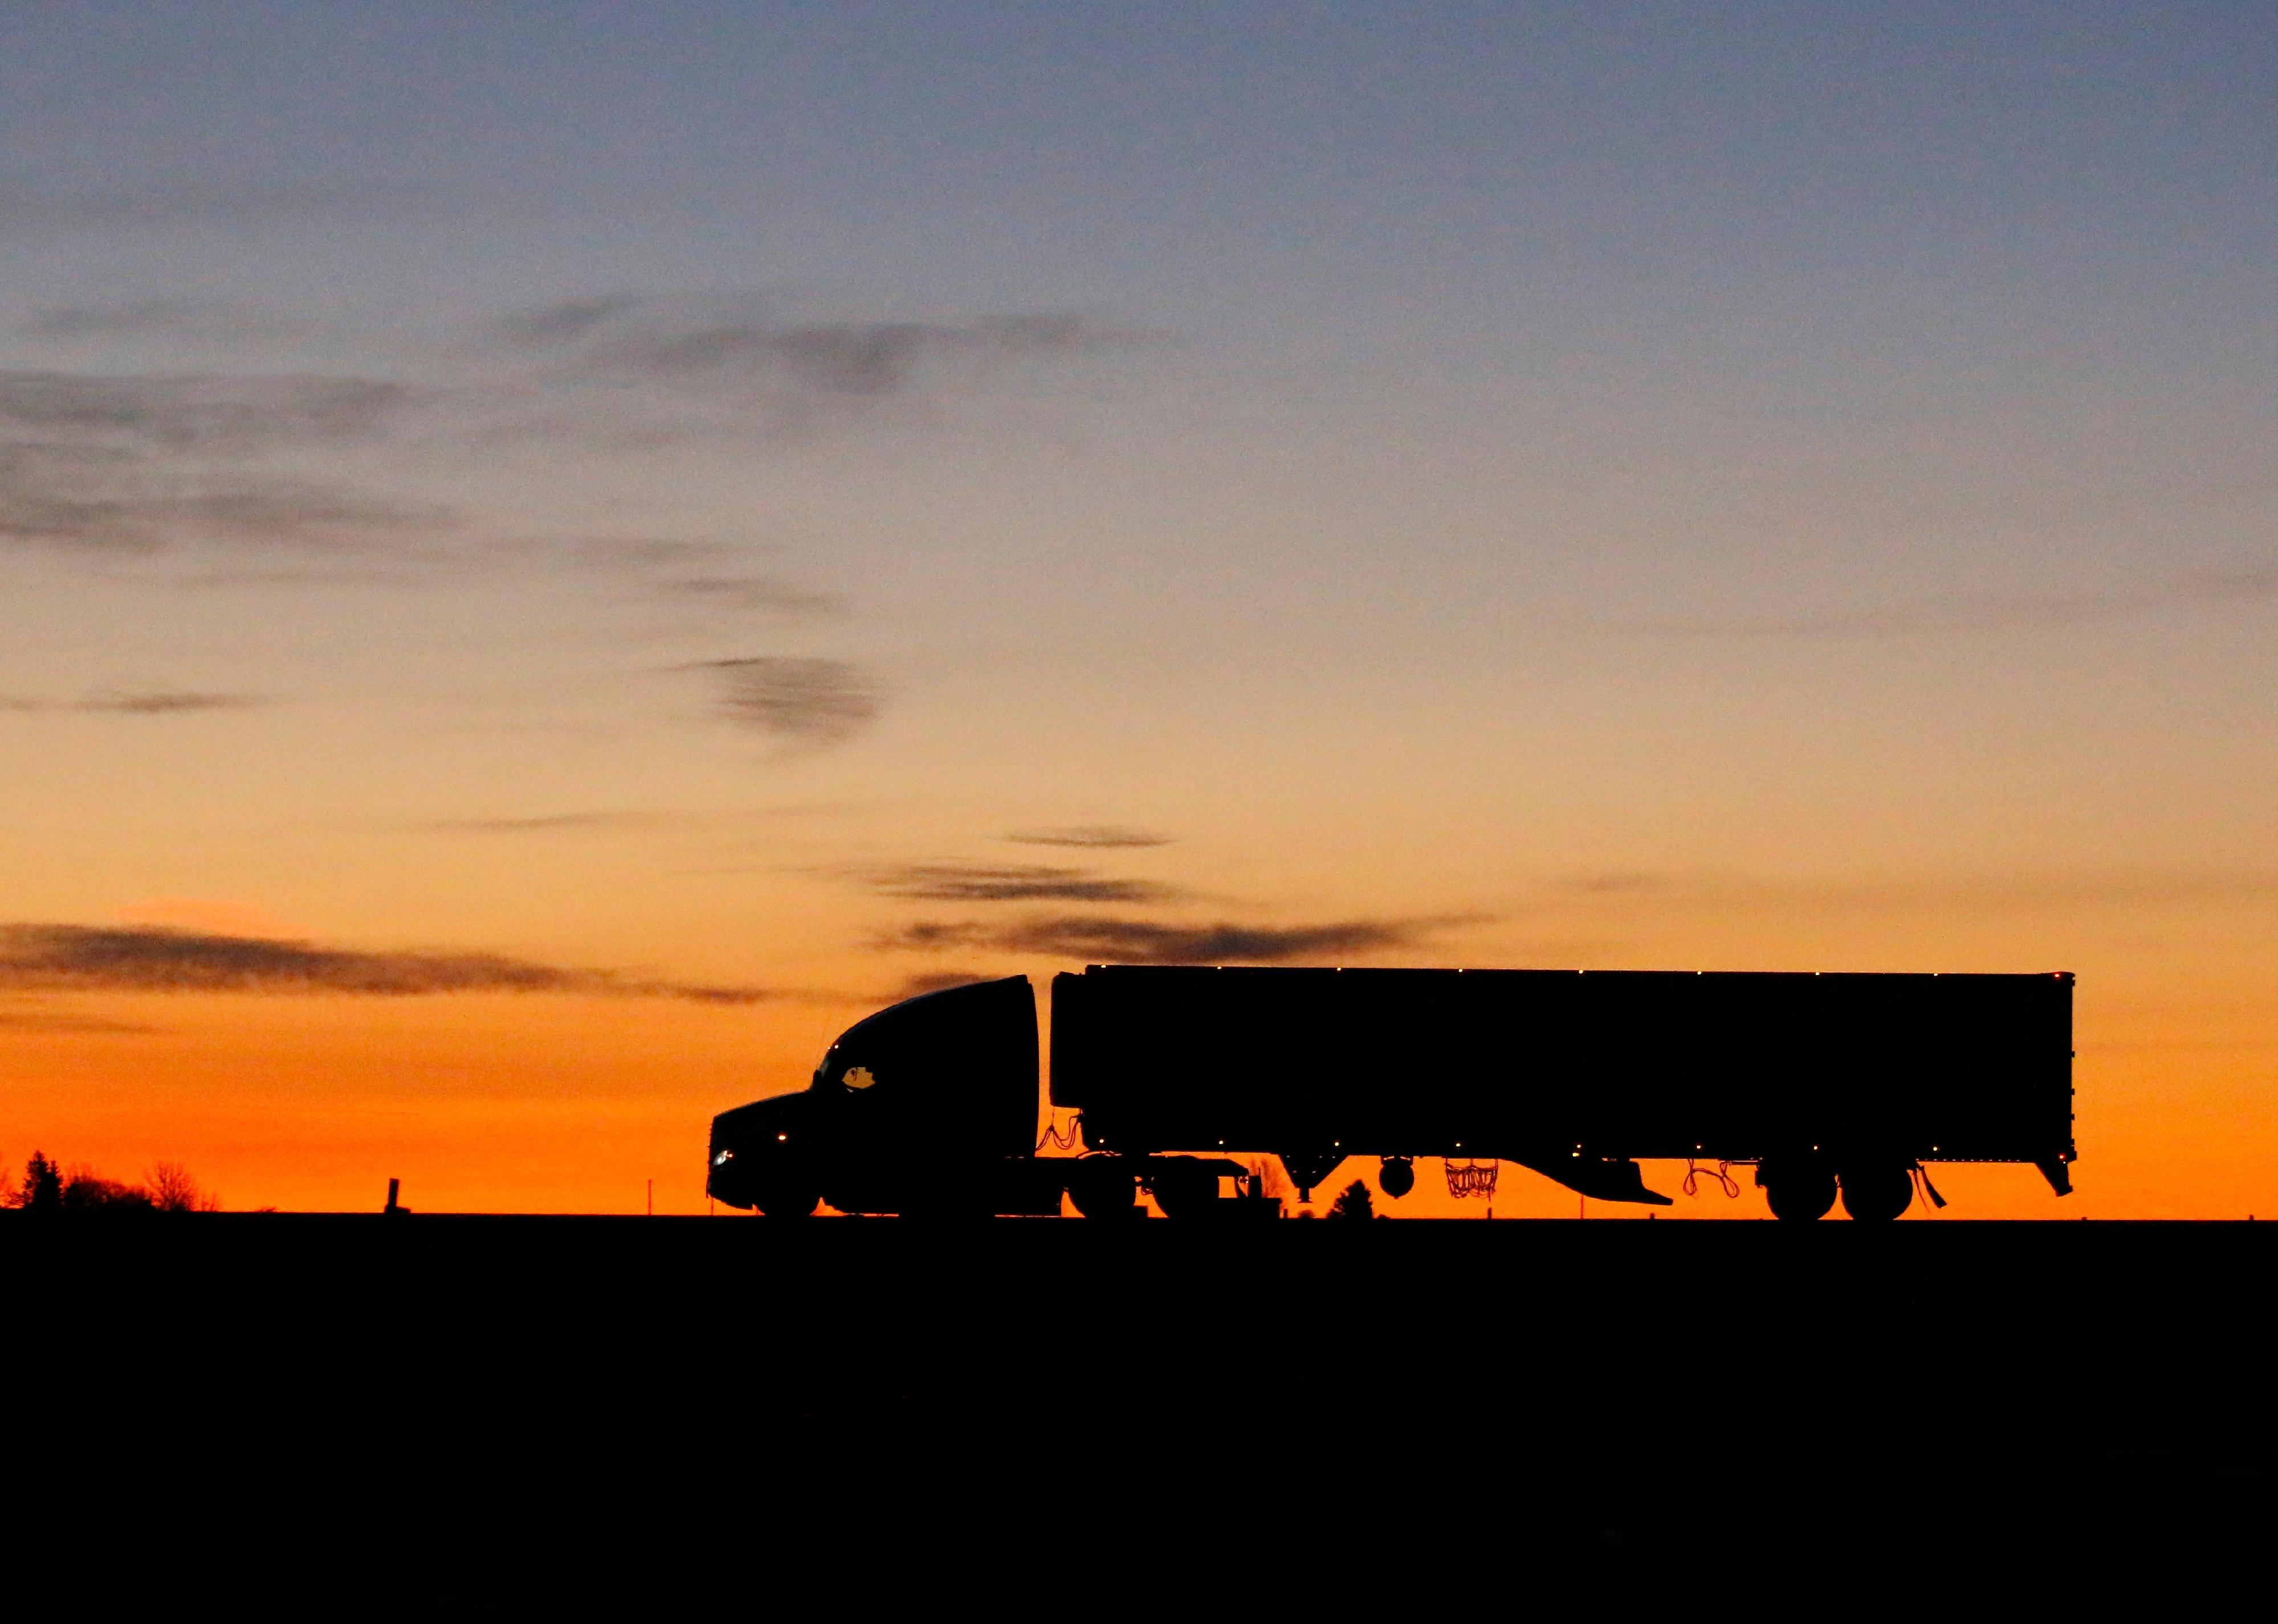 Silhouette of a large truck driving on a road at sunrise.